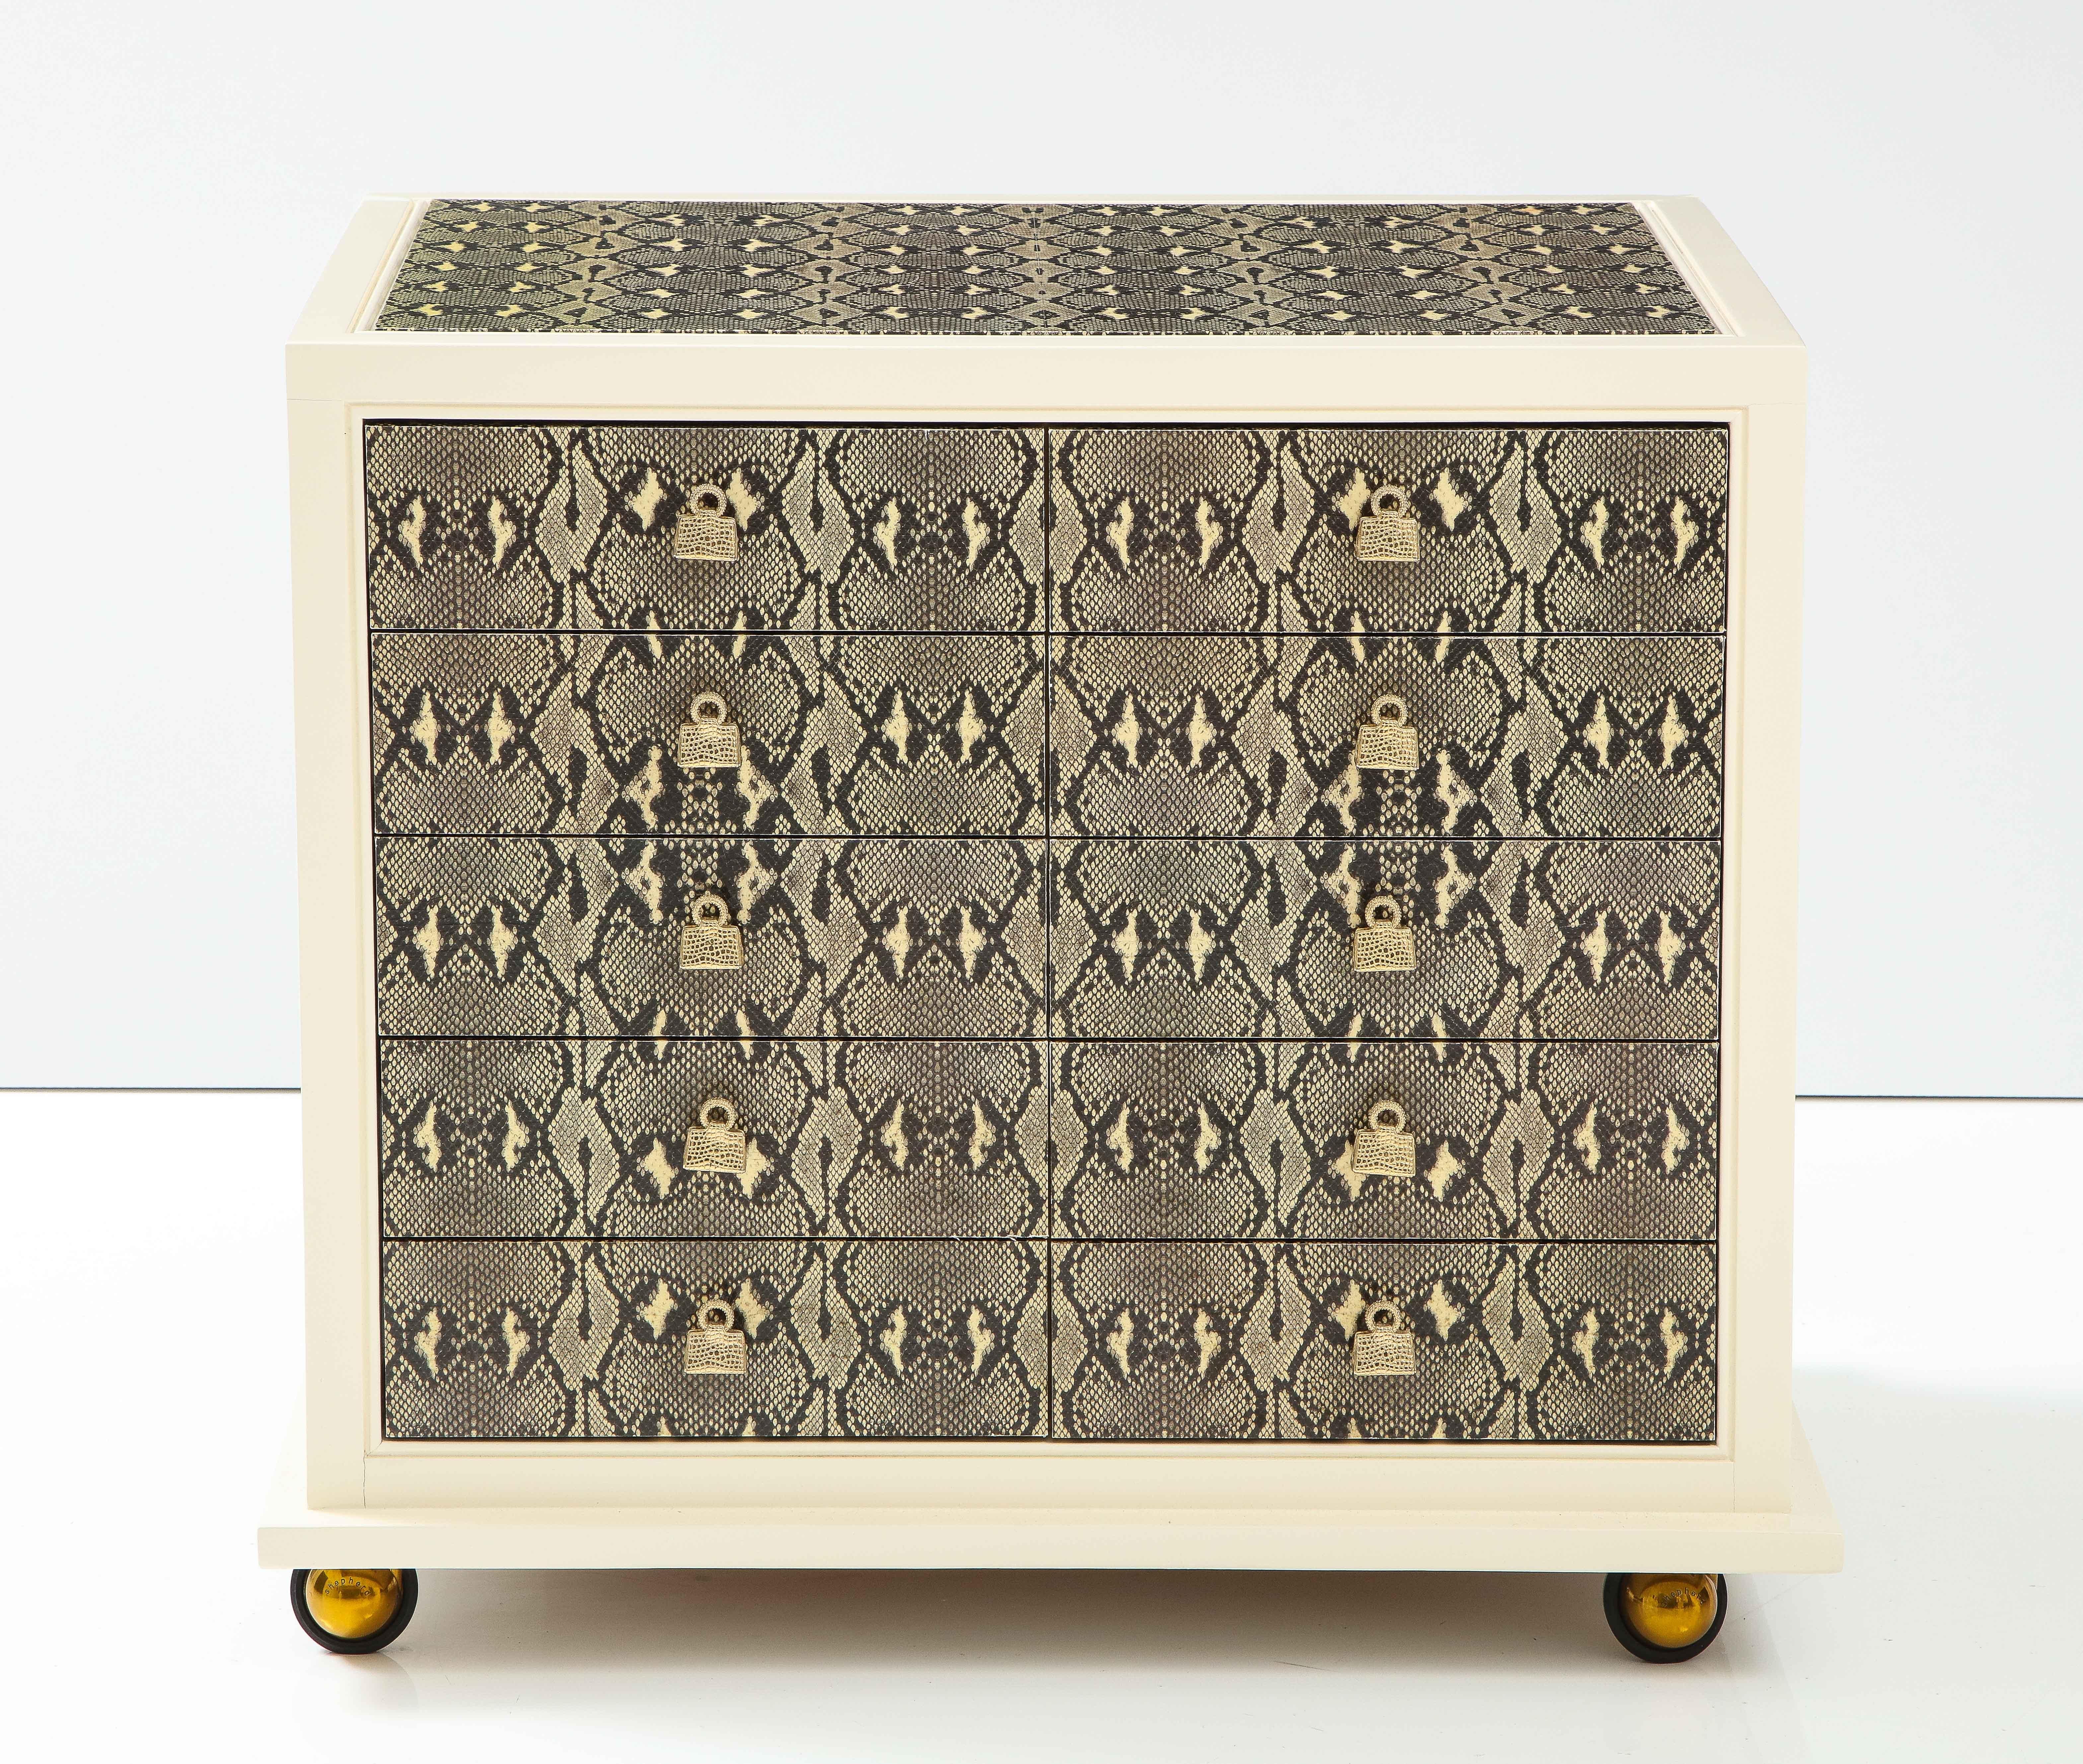 Judith Leiber Custom designed cabinet for the Madison Avenue store.
The custom  10 drawer cabinet with a Faux snakeskin print is a backdrop for the exquisite 
designed Gold Handbag drawer pulls.
The drawers all have removable velvet lined bottoms